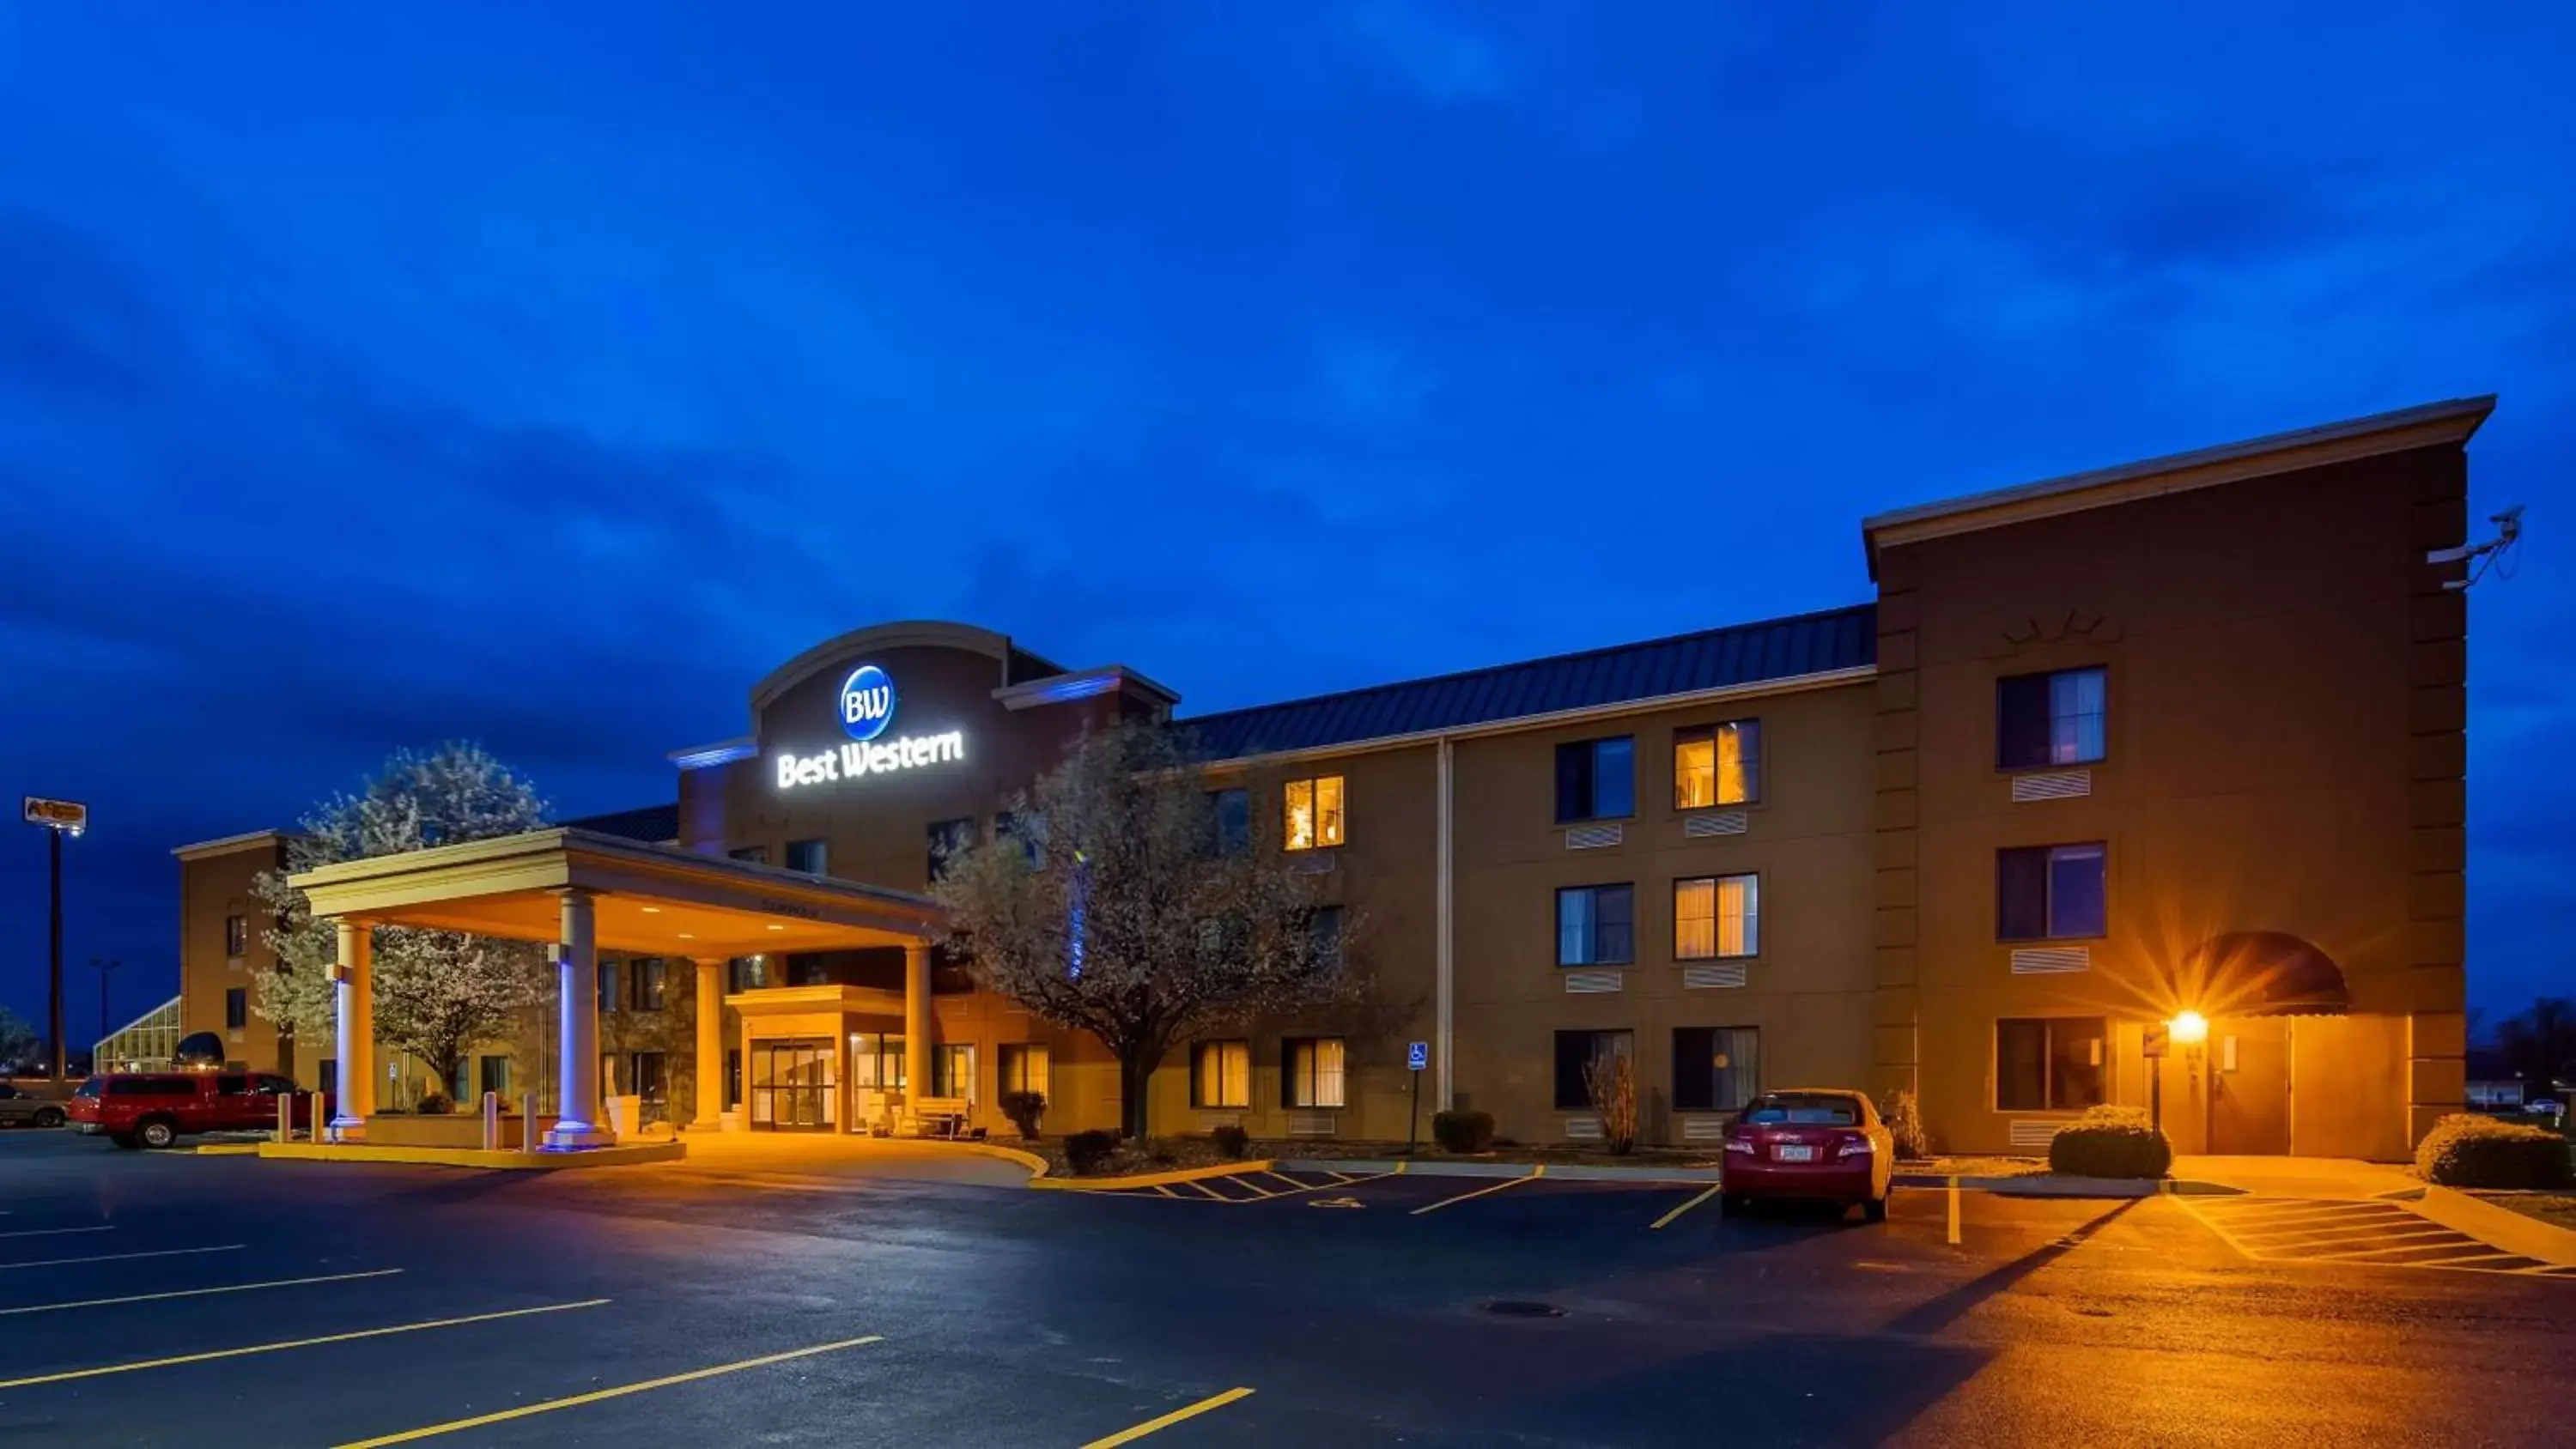 Property Building in Best Western Marion Hotel